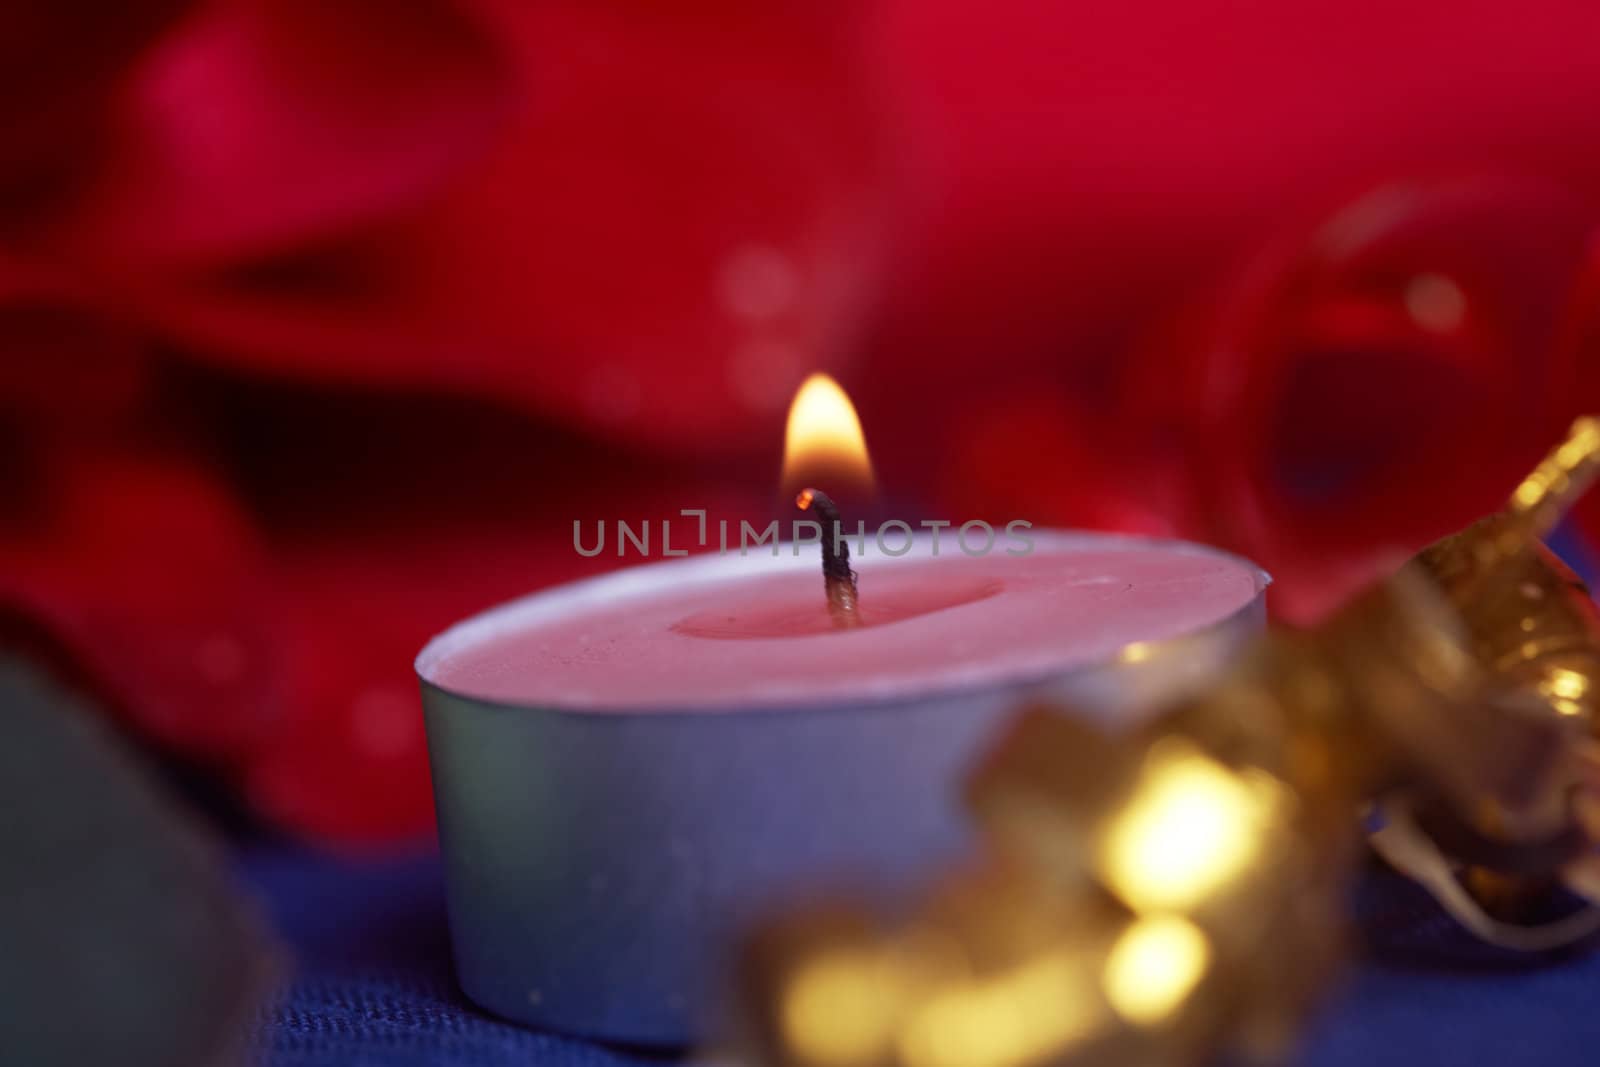 Burning candle and red flowers on a table